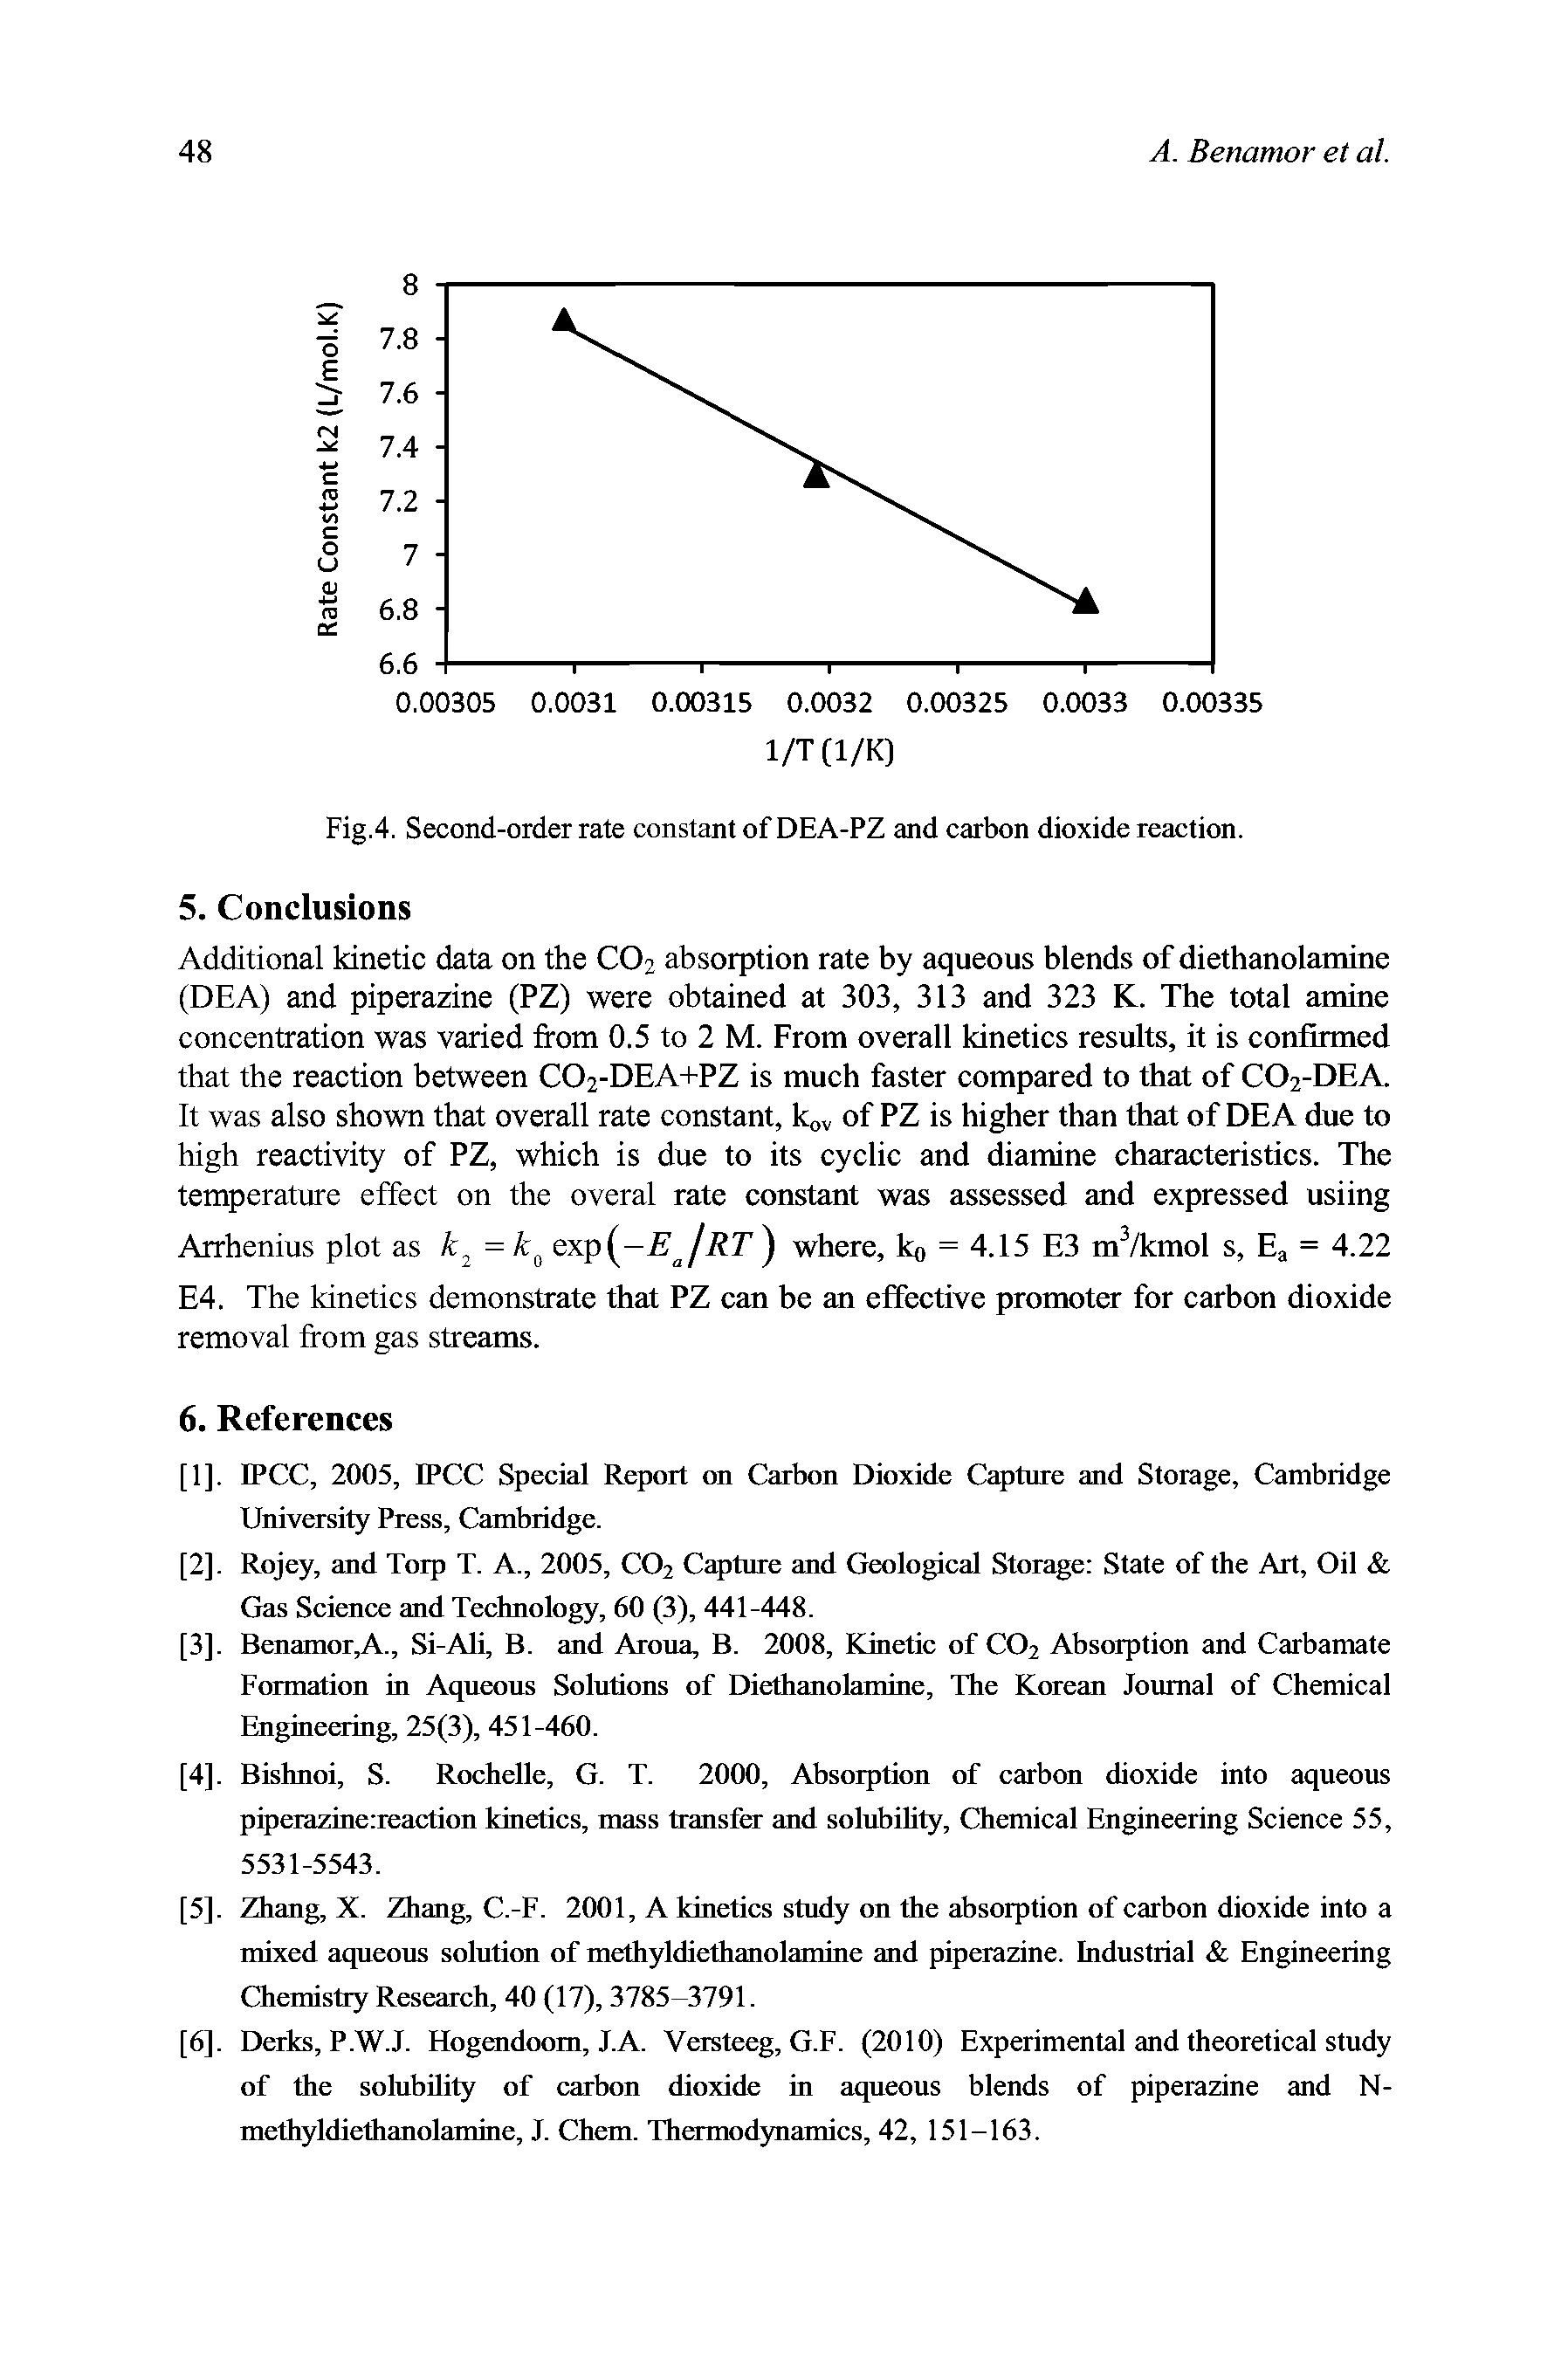 Fig.4. Second-order rate constant of DEA-PZ and carbon dioxide reaction.